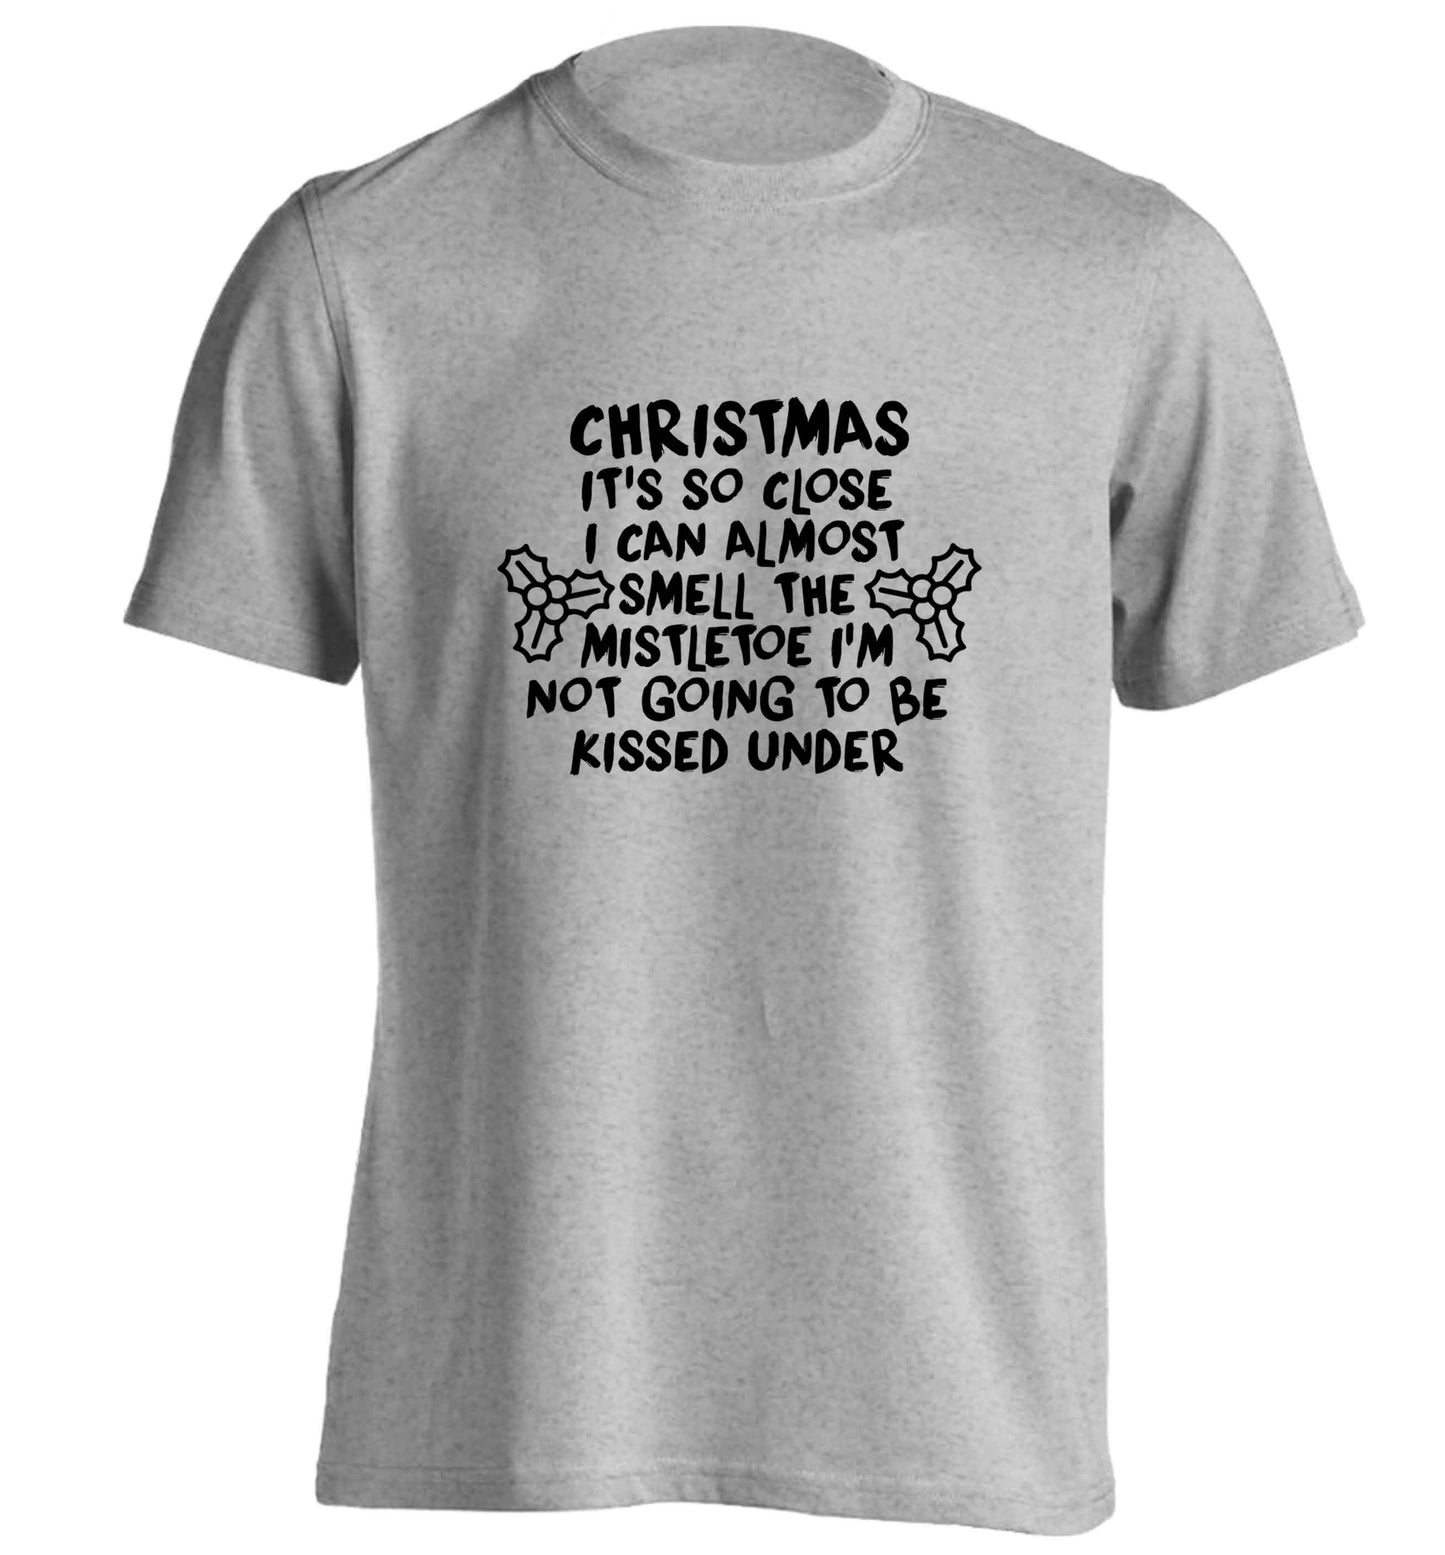 Christmas it's so close I can almost smell the misteltoe I'm not going to be kissed under adults unisex grey Tshirt 2XL